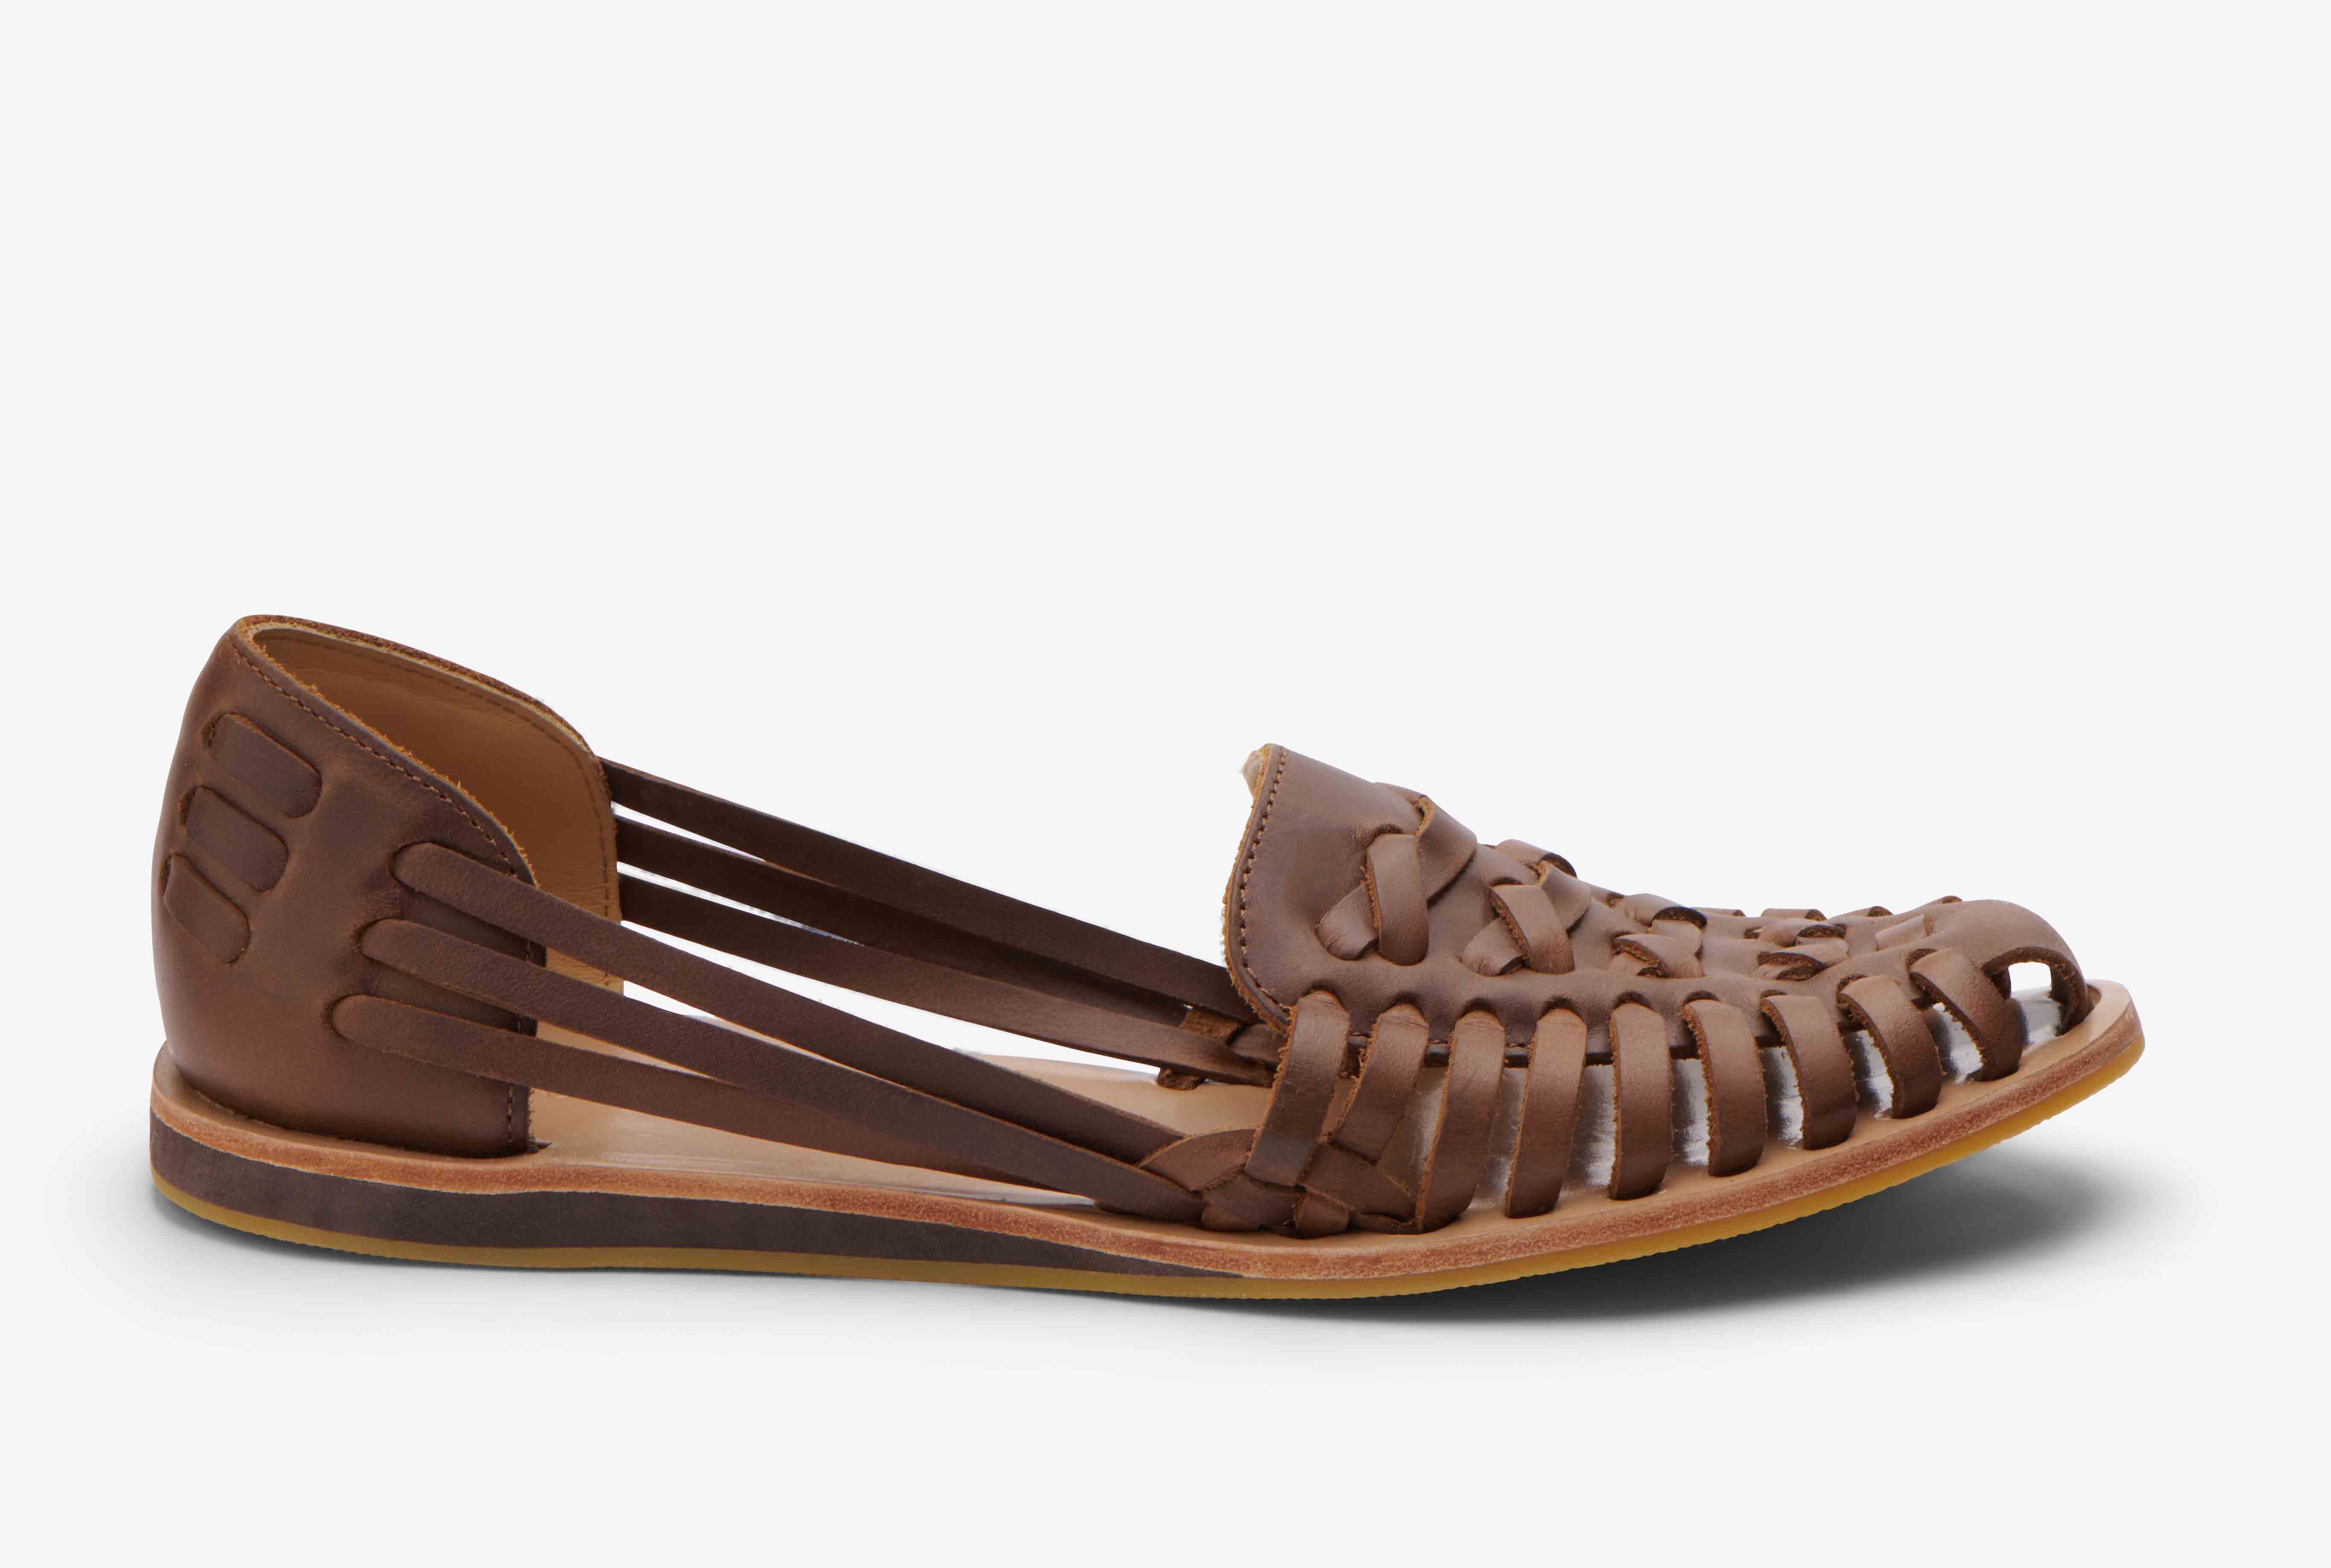 Nisolo Women's Huarache Sandal Brown - Every Nisolo product is built on the foundation of comfort, function, and design. 